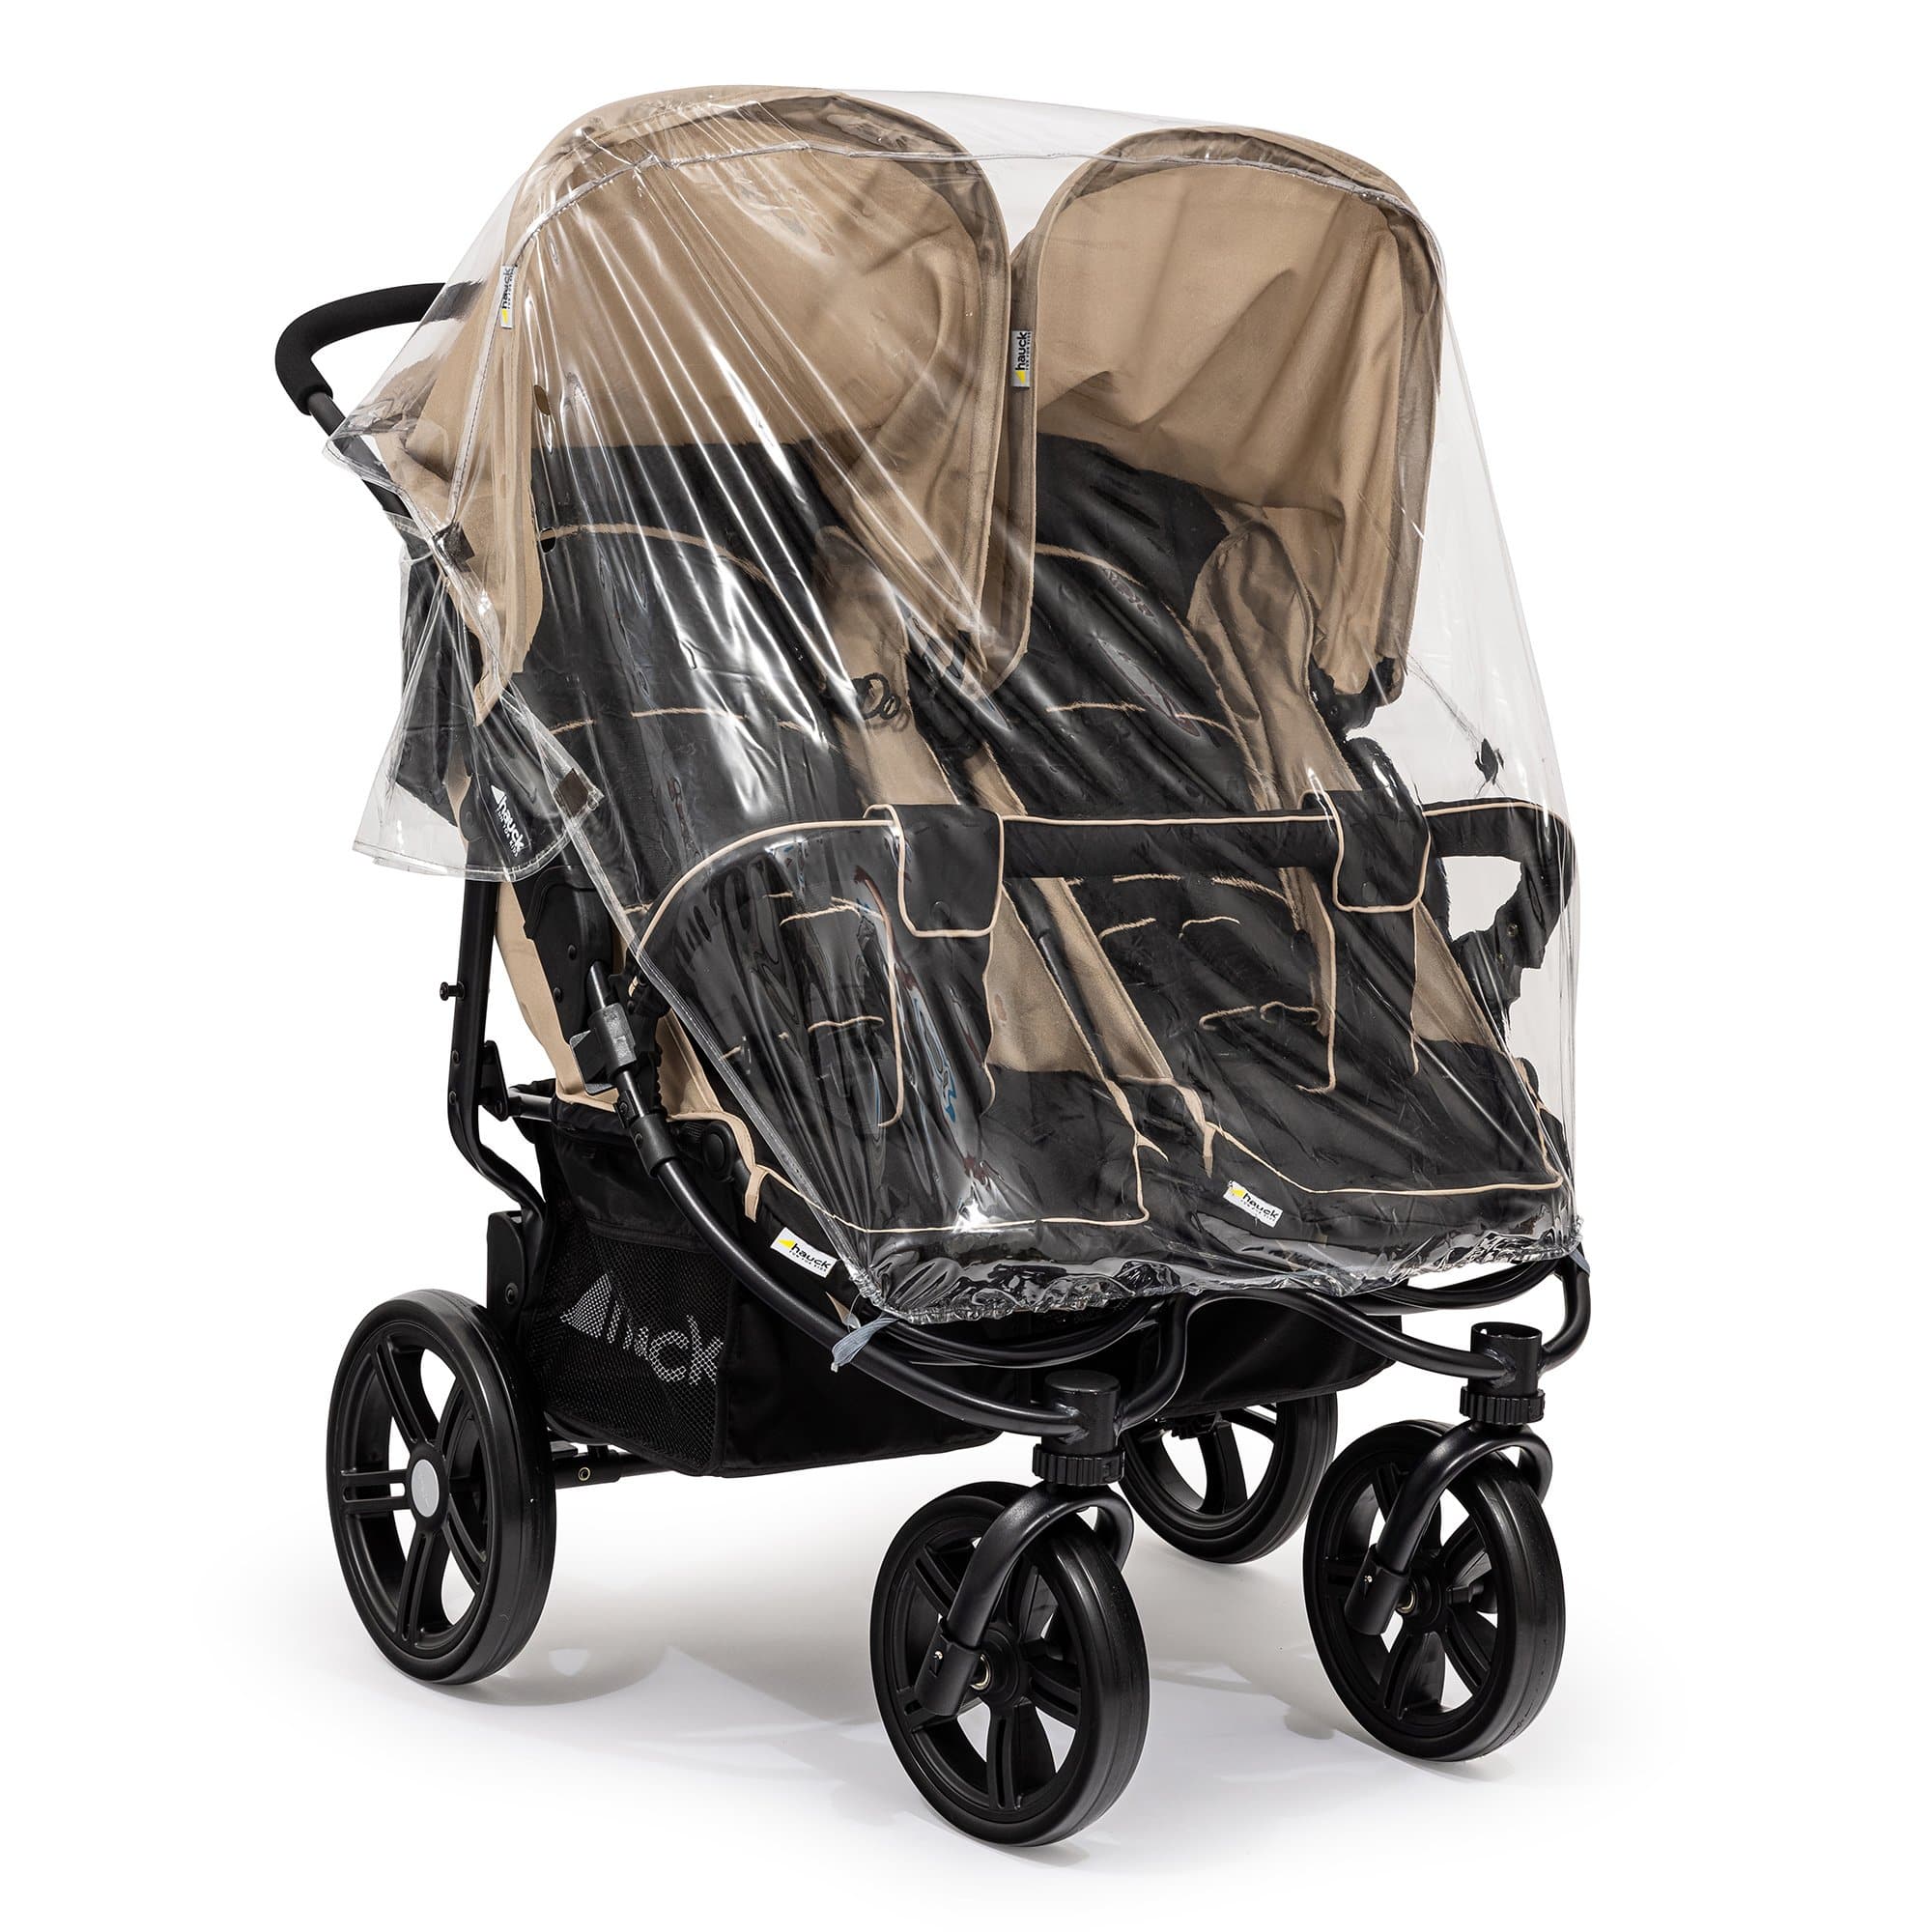 Universal Rain Cover For All Side By Side Pushchairs - Fits All Models - For Your Little One